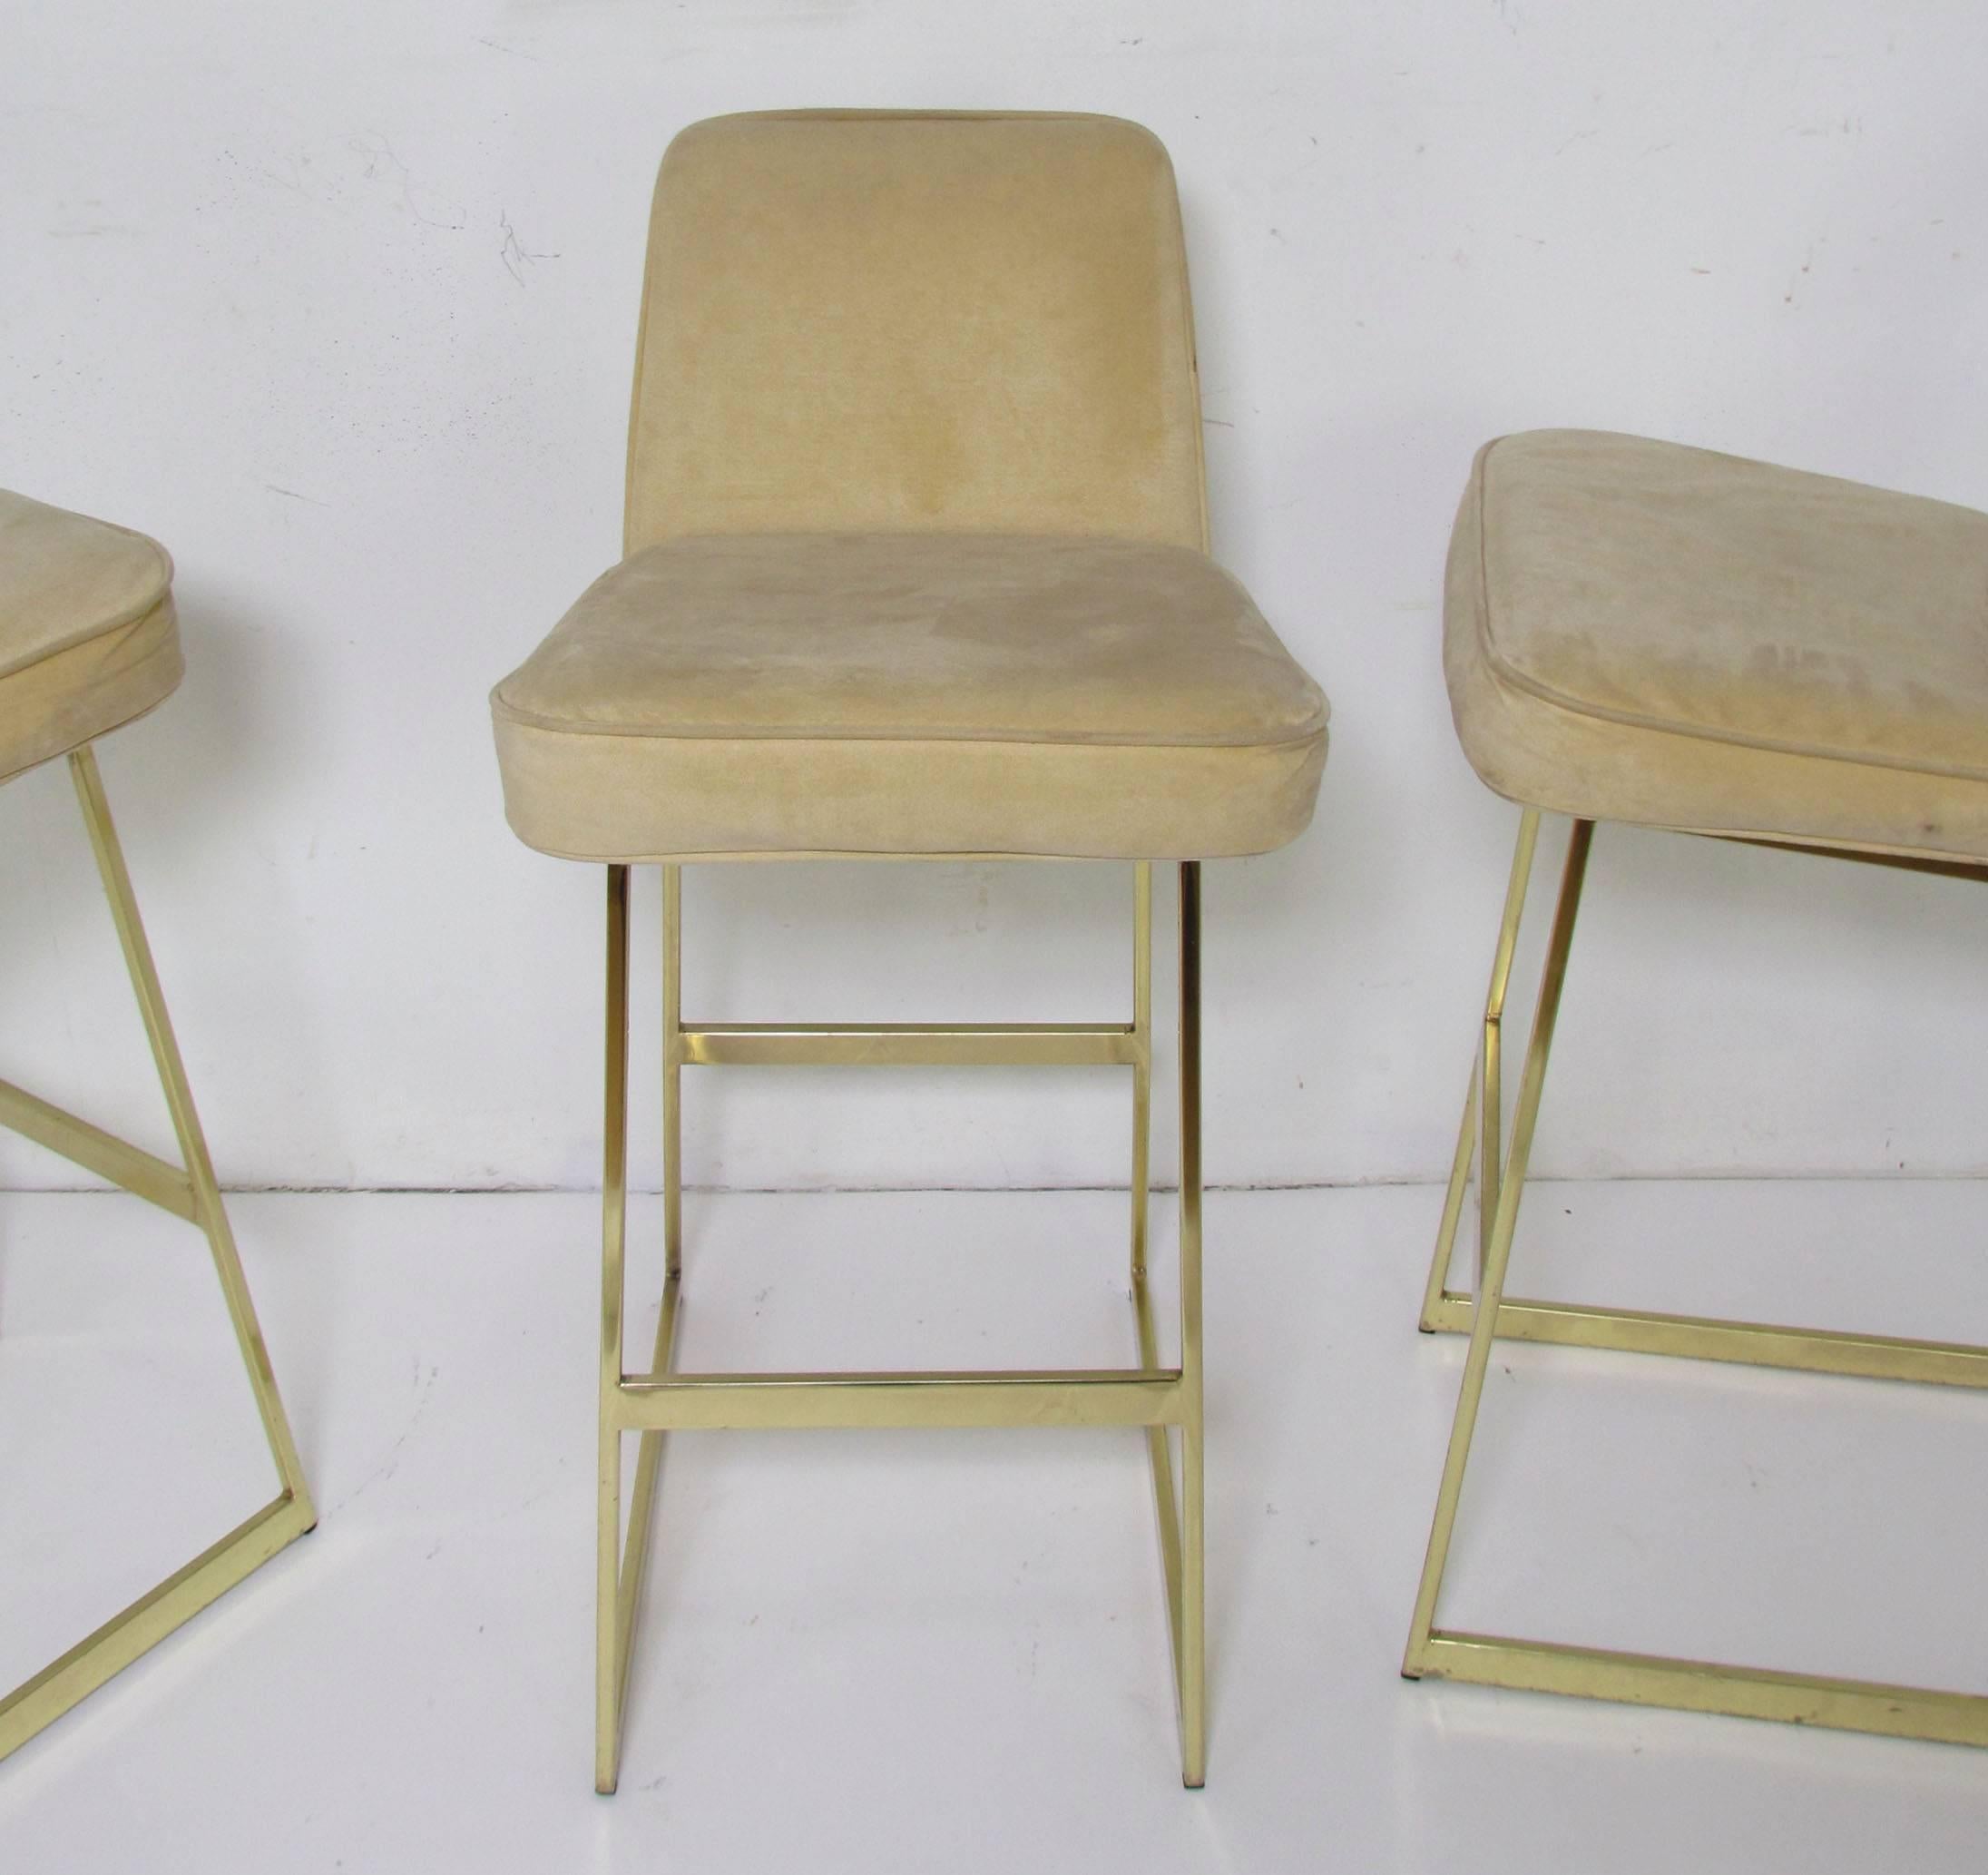 Late 20th Century Set of Three Brass Bar Stools in the Manner of Milo Baughman by Tri-Mark